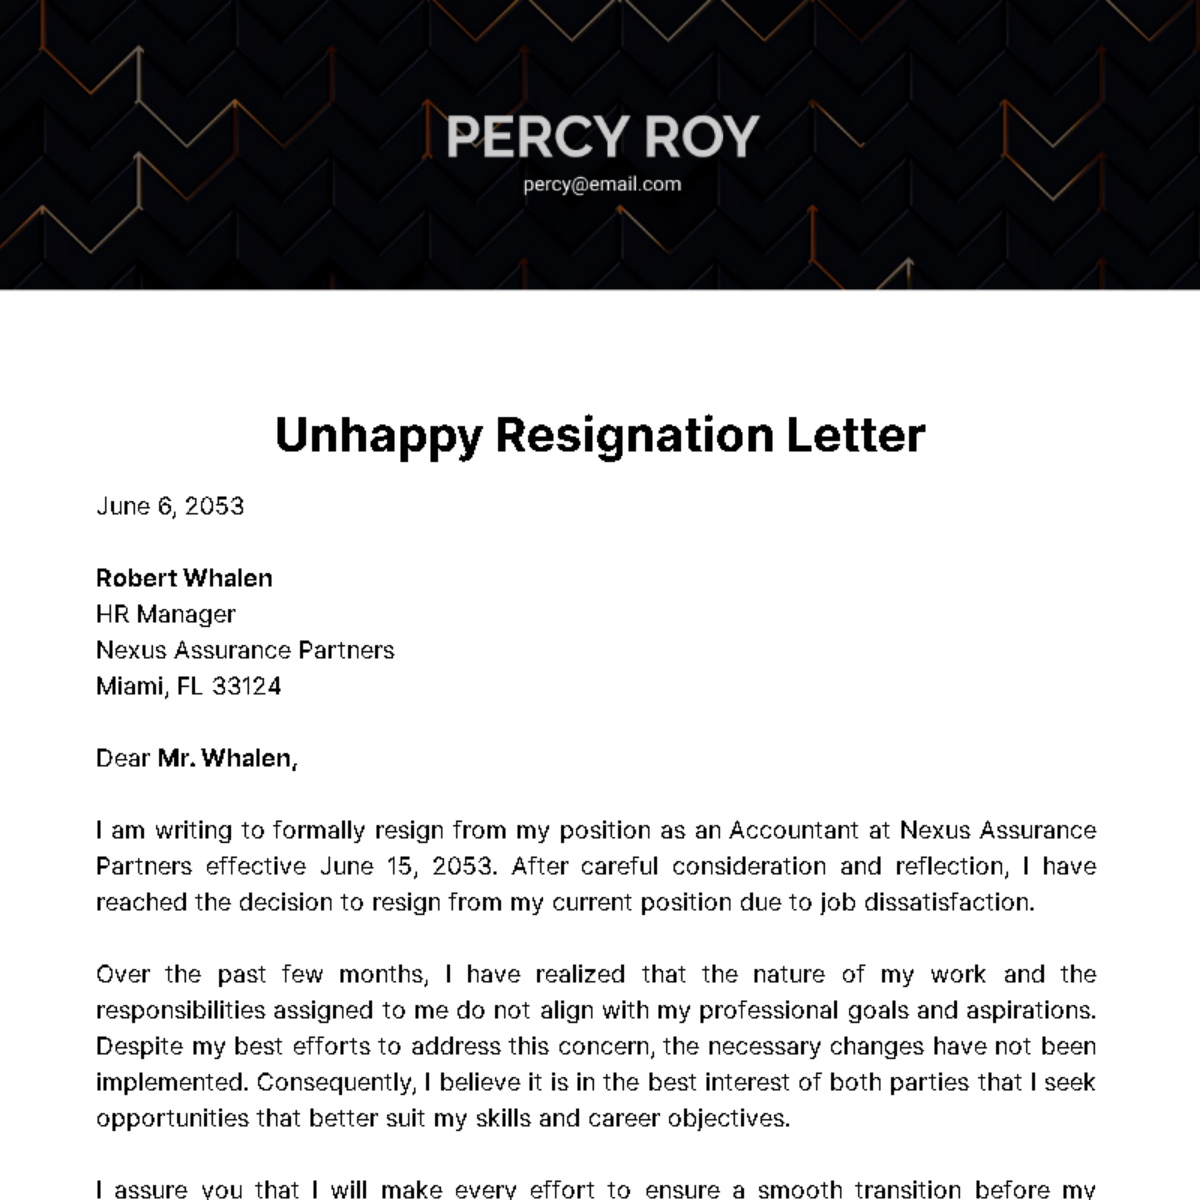 Unhappy Resignation Letter Template